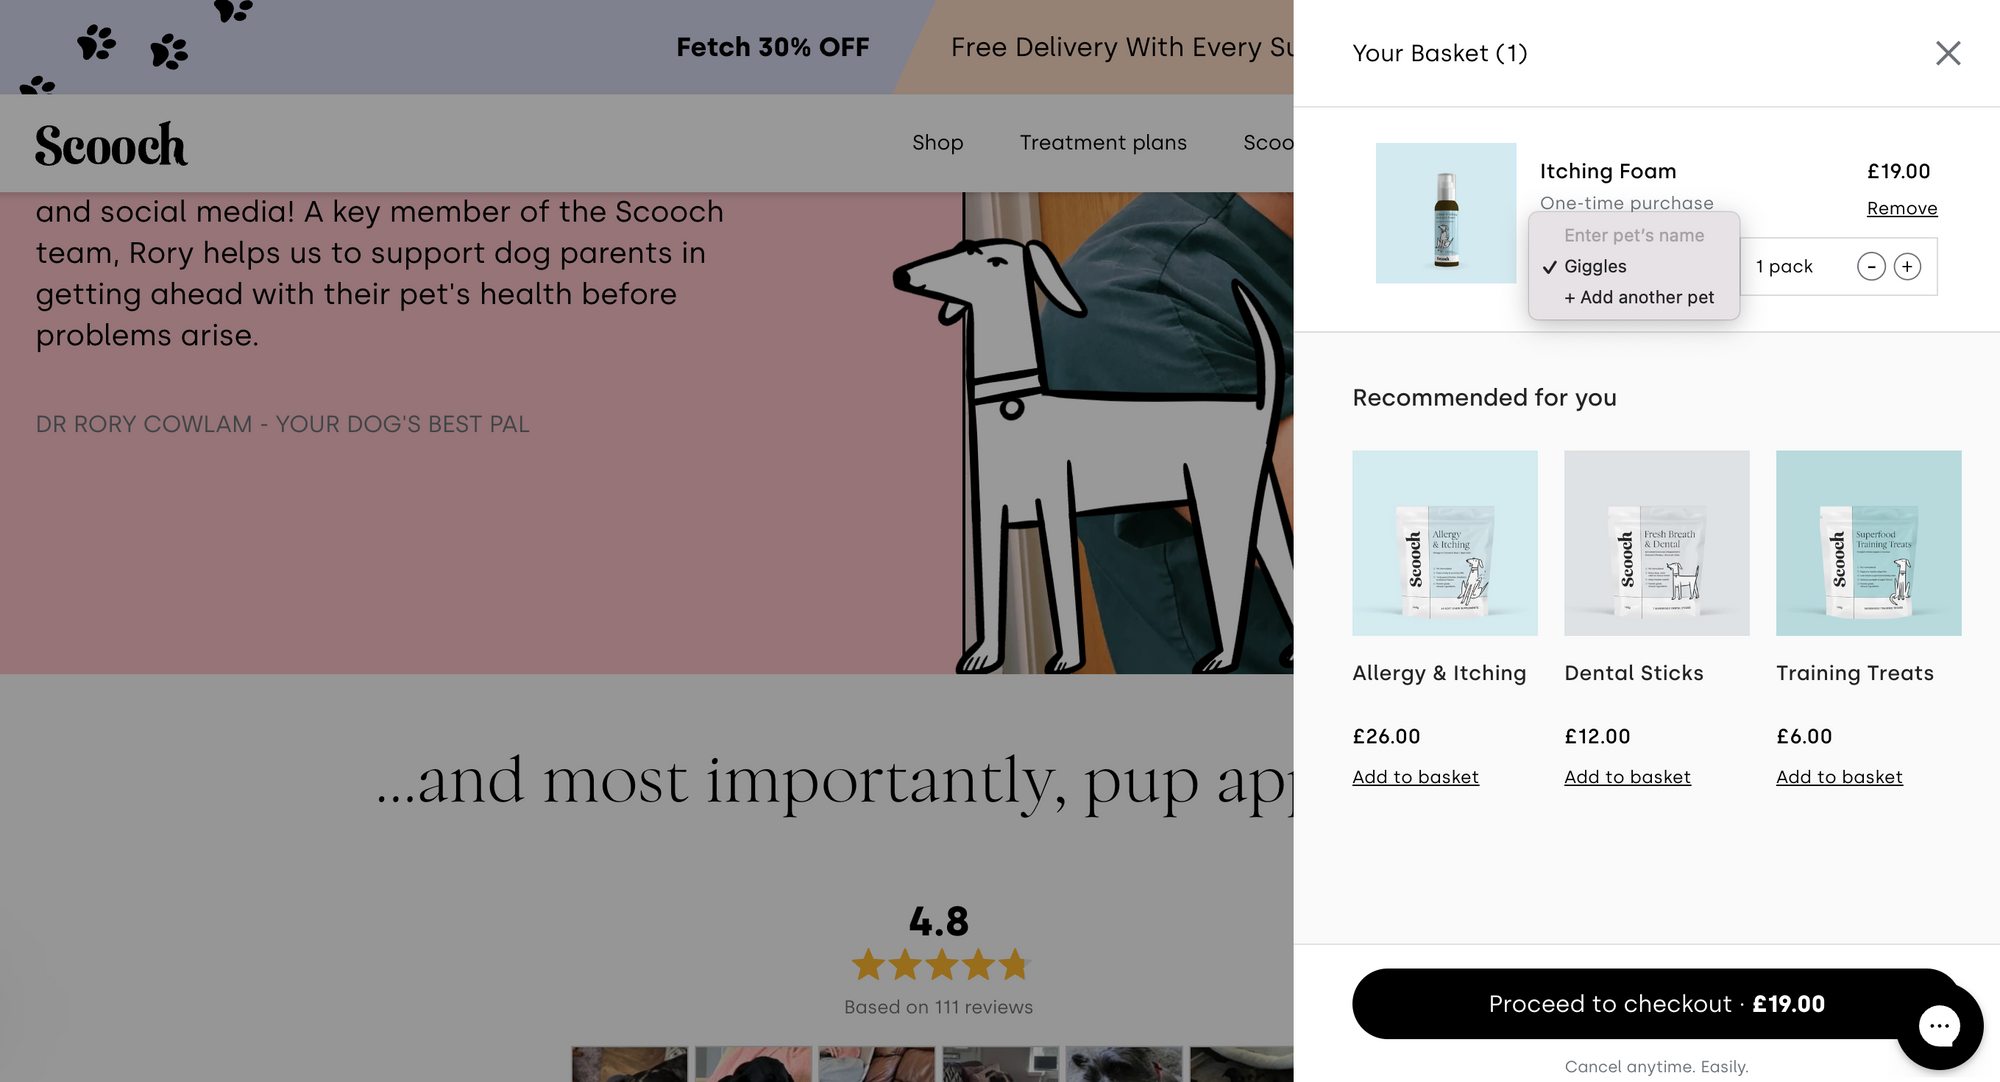 Scooch, uses the cart page to ask customers the name of the pet they are purchasing for